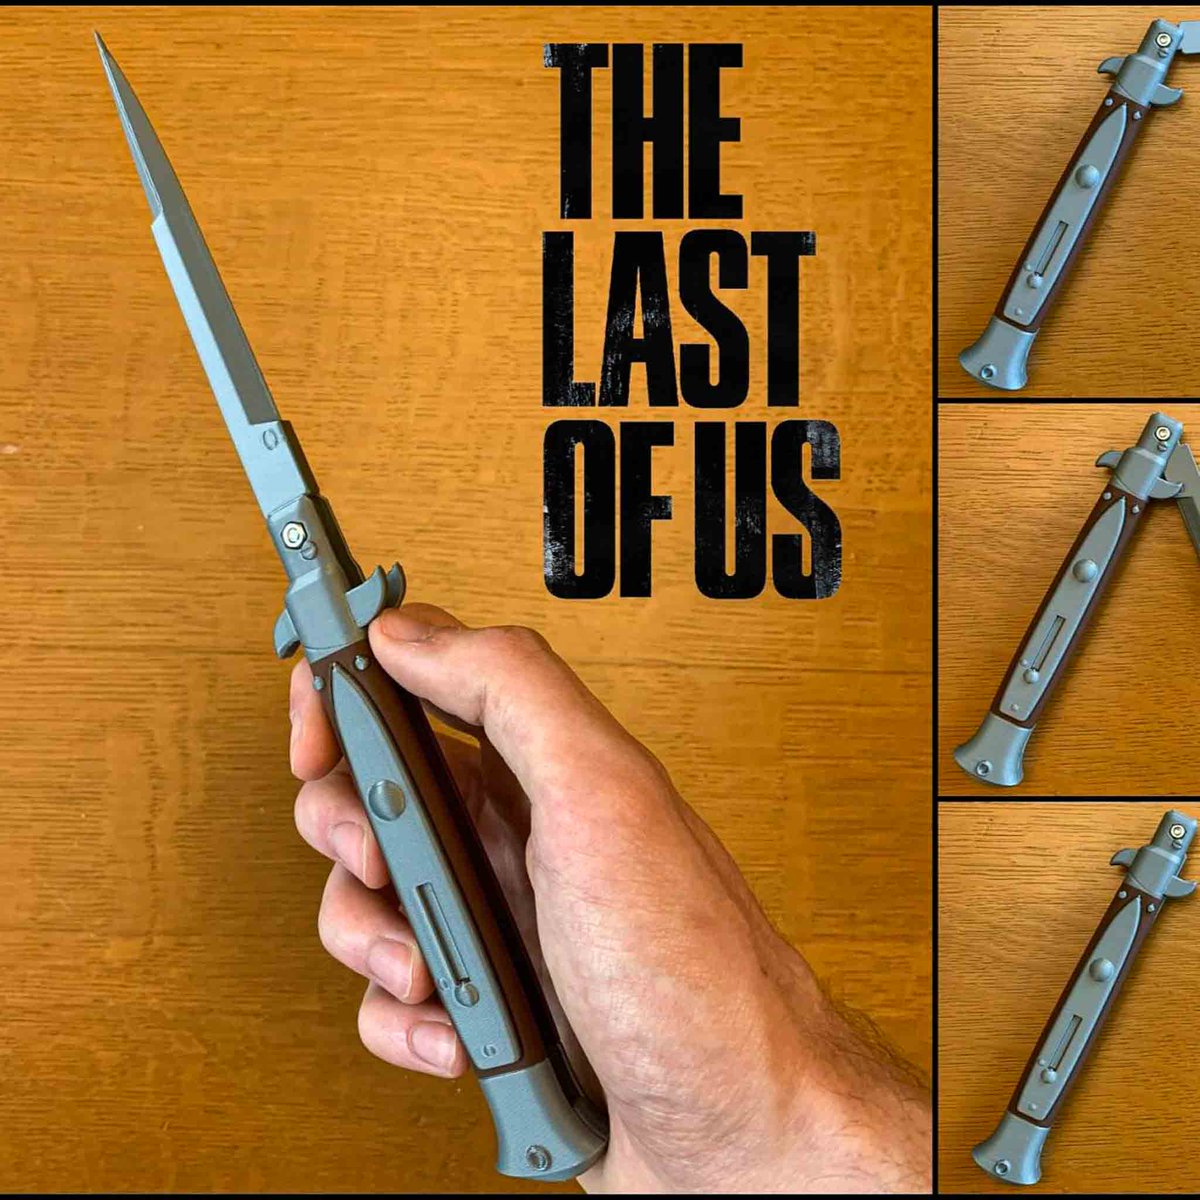 Ellie's Switchblade on Sale
---
Check out: 2fast2see.co/products/last-…
---
#thelastofus #naughtydog #ellie #elliewilliams #thelastofus2 #thelastofuspart2 #joel #joelmiller #tlou #tlou2 #thelastofusellie #tlouellie #switchblade #knife